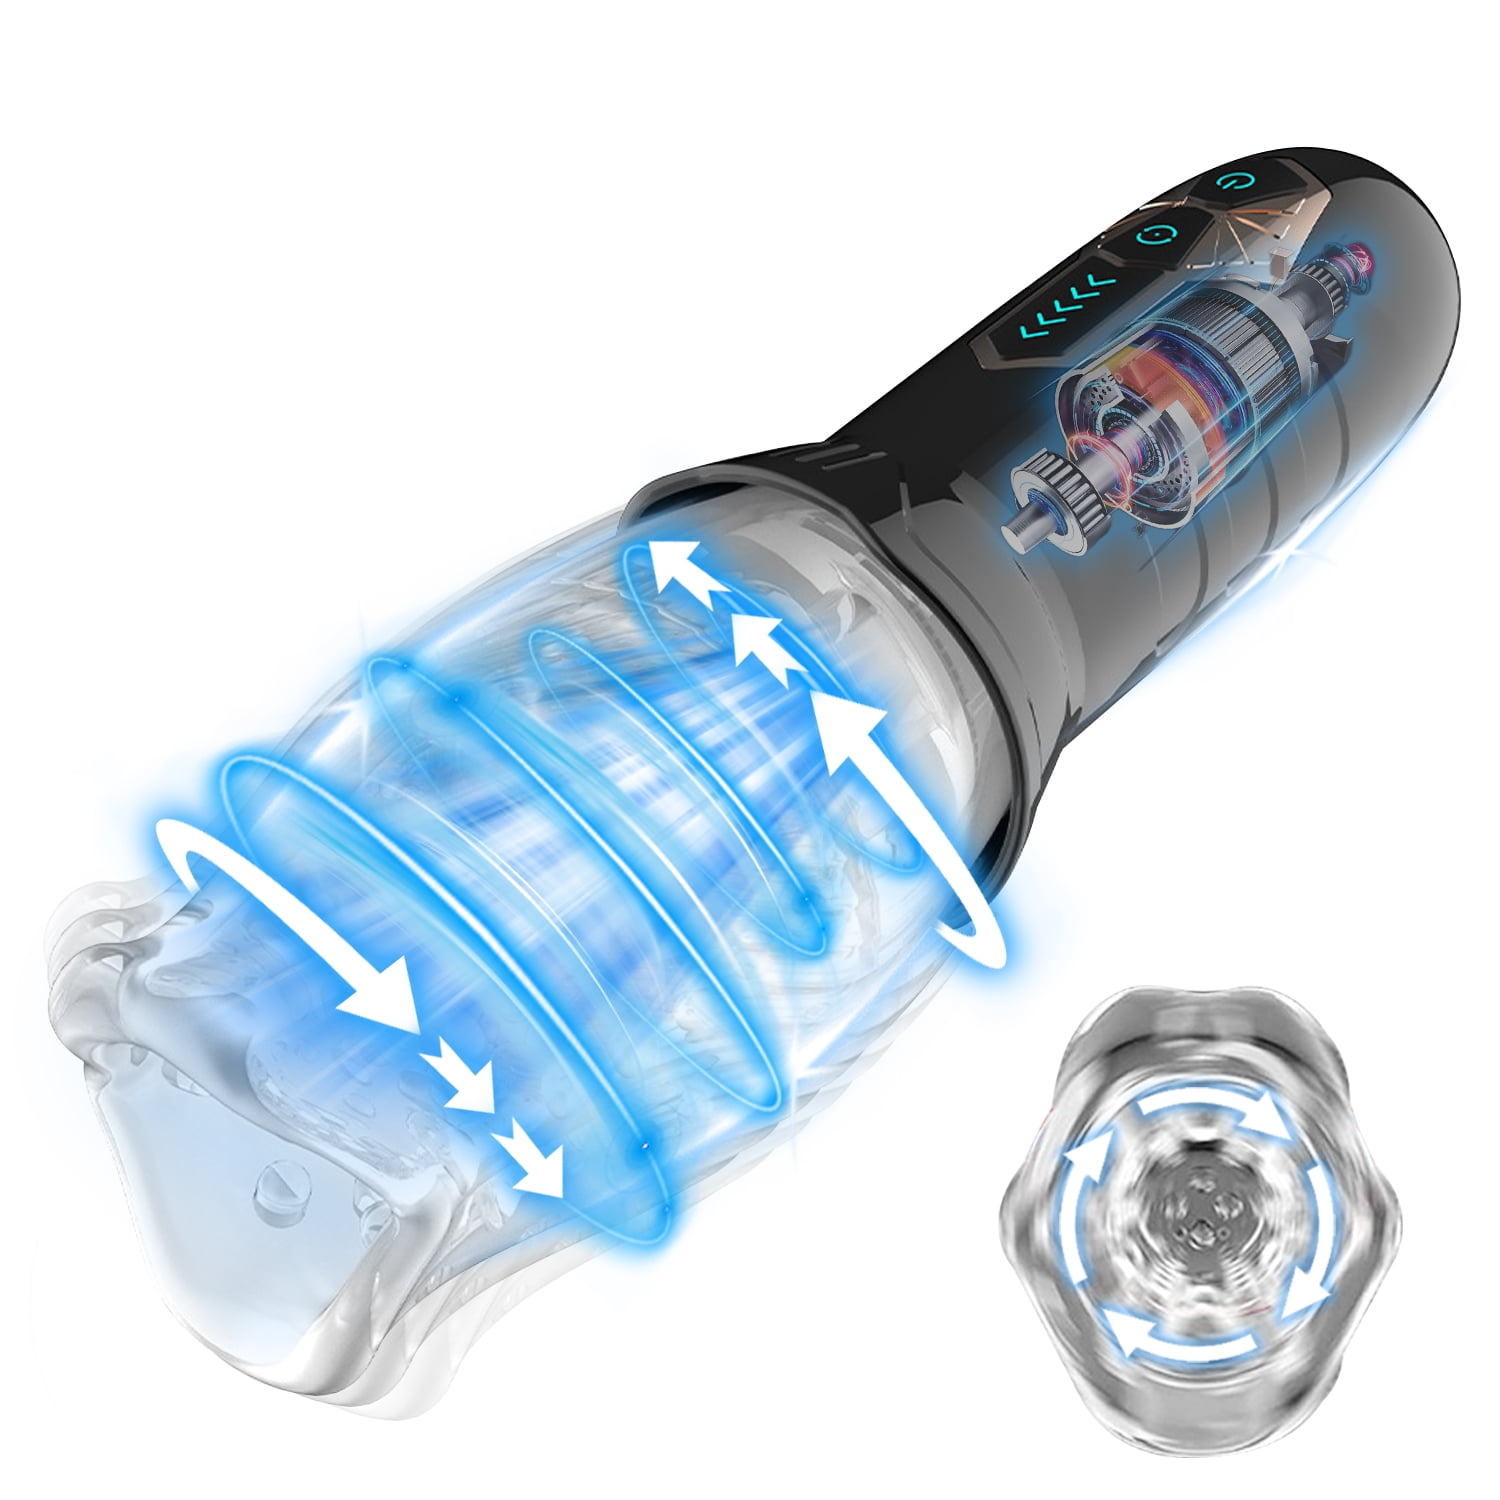 QVOX Automatic Male Masturbator Stroker, Masturbator Cup with 10 Vibrations and 5 Frequency Rotating Male Self Pleasure Machine Sex Toys for pic image image